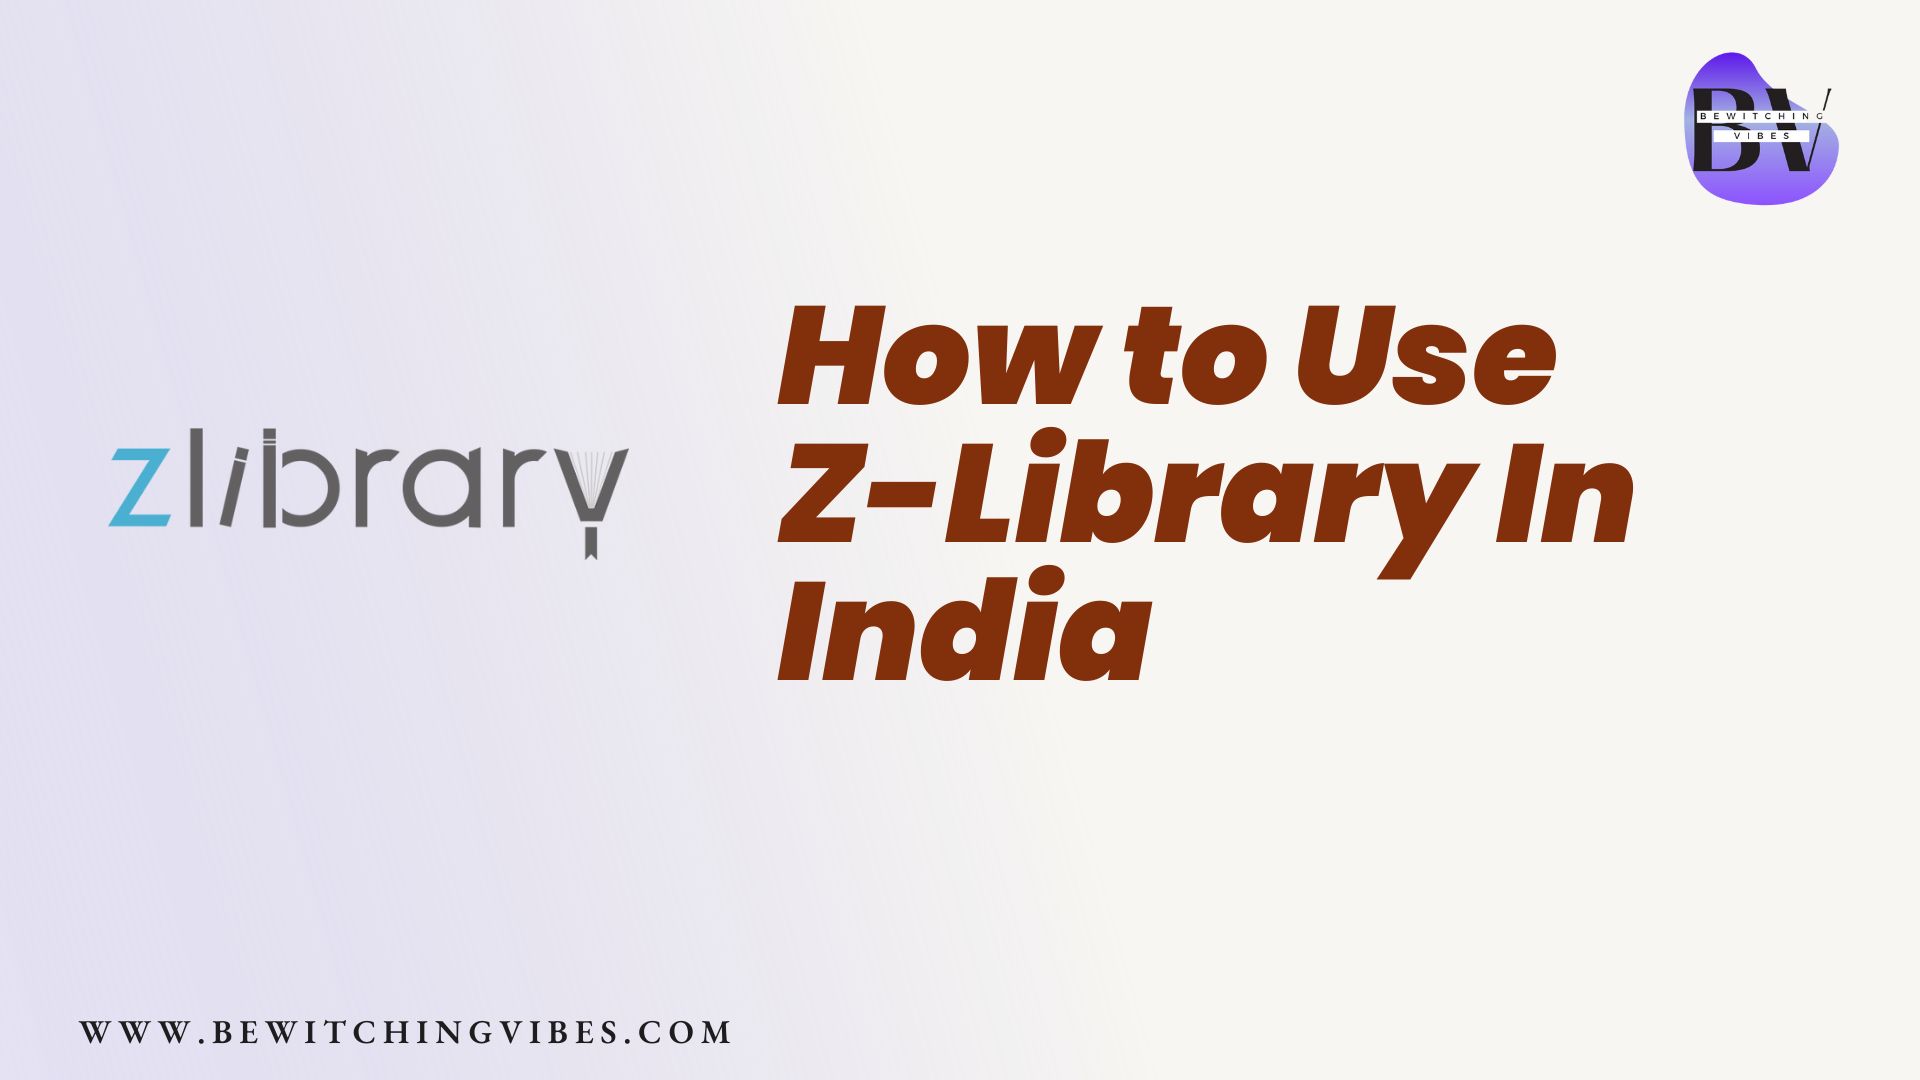 How to use Z-library in india